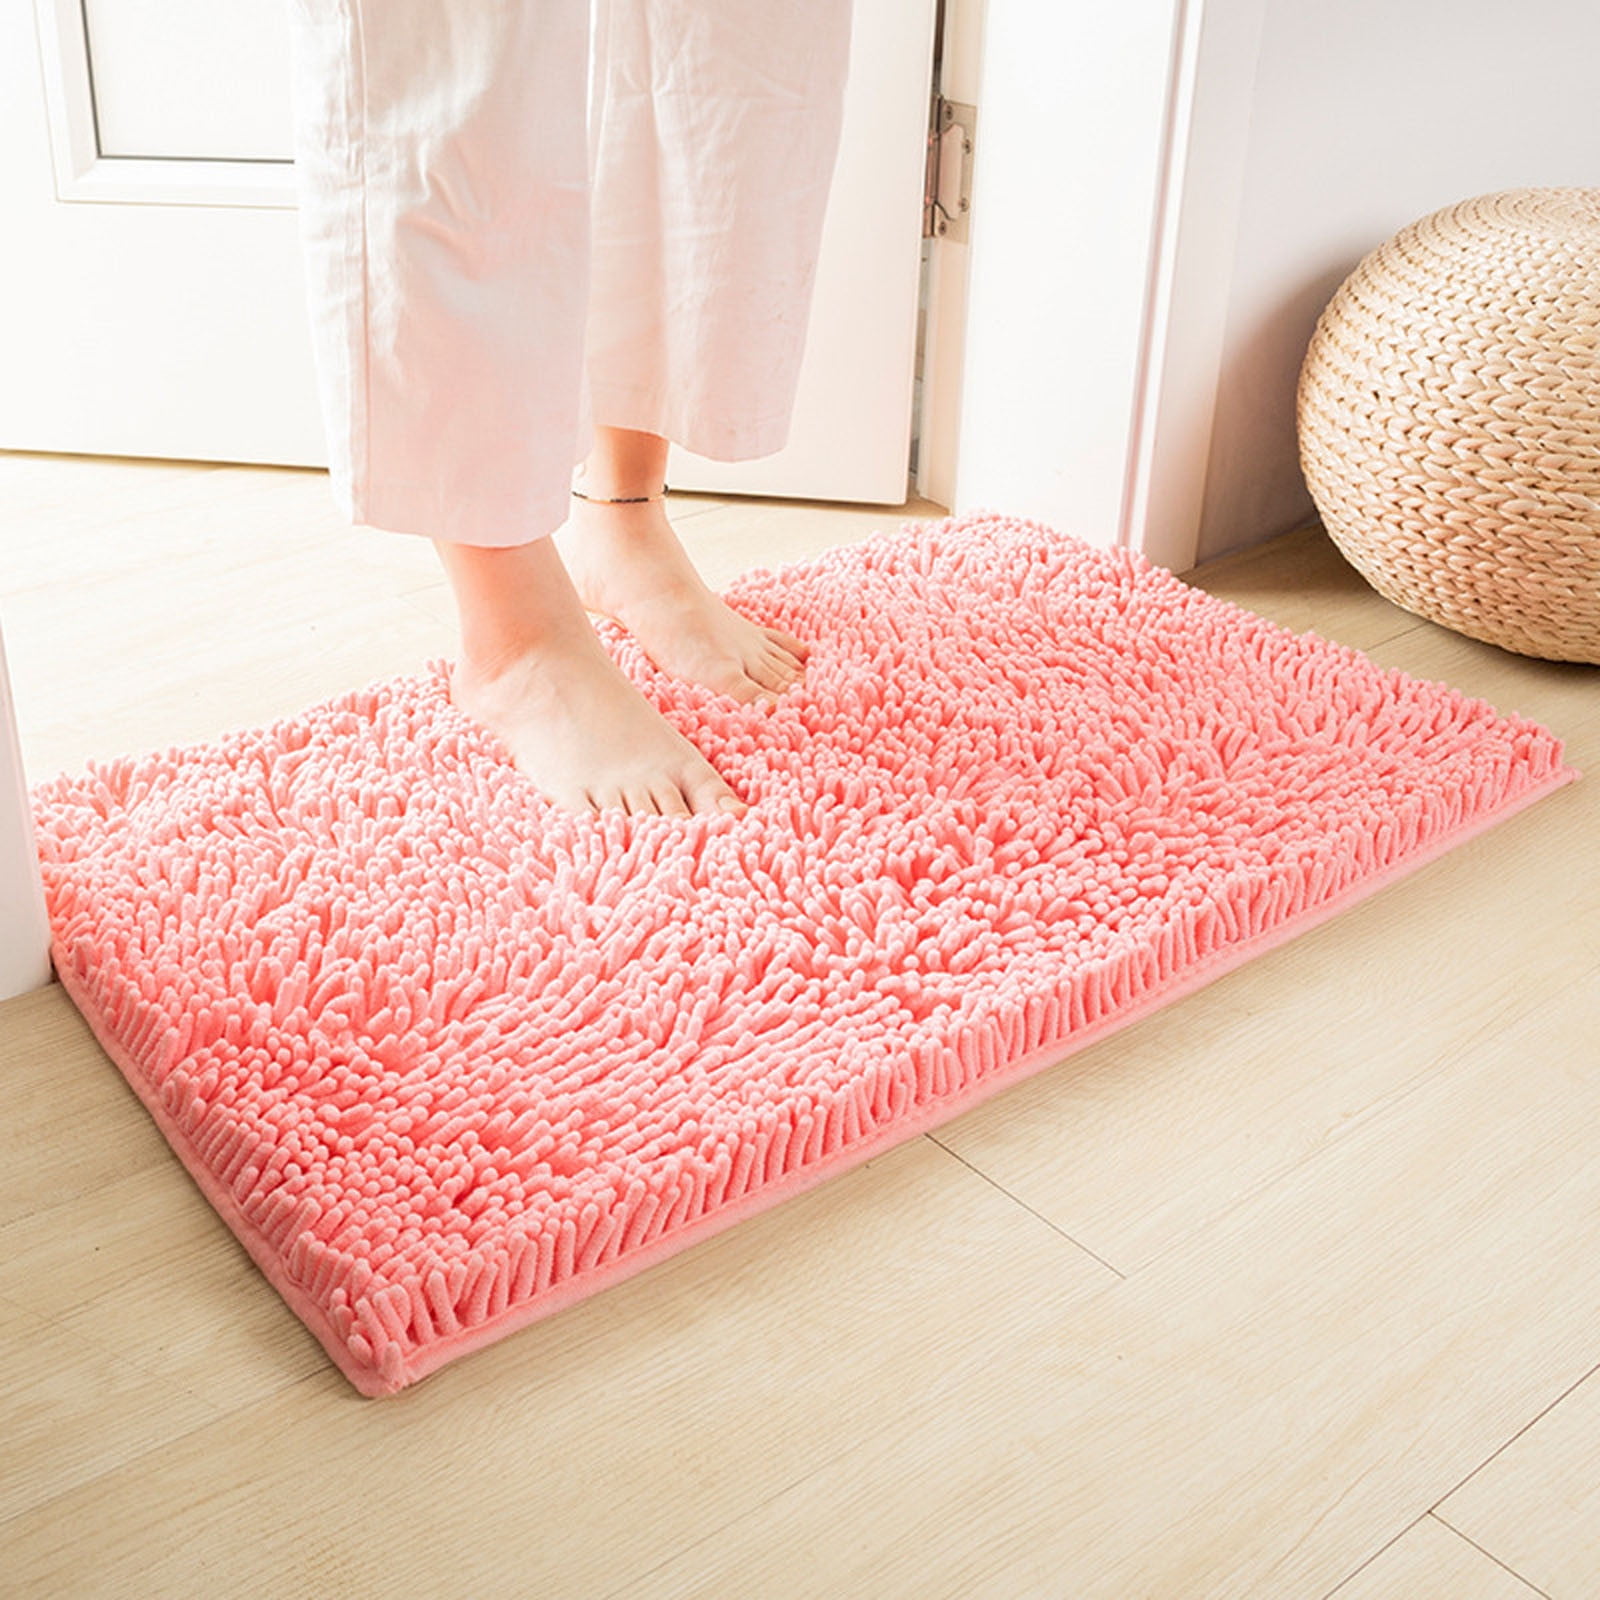 Apple Bathroom Rugs And Mat, Cute Kids Bath Doormats Decor Rug, Red Tufted  Plush, Machine Washable Luxury Shaggy High Absorbent And Anti Slip Foot Mat